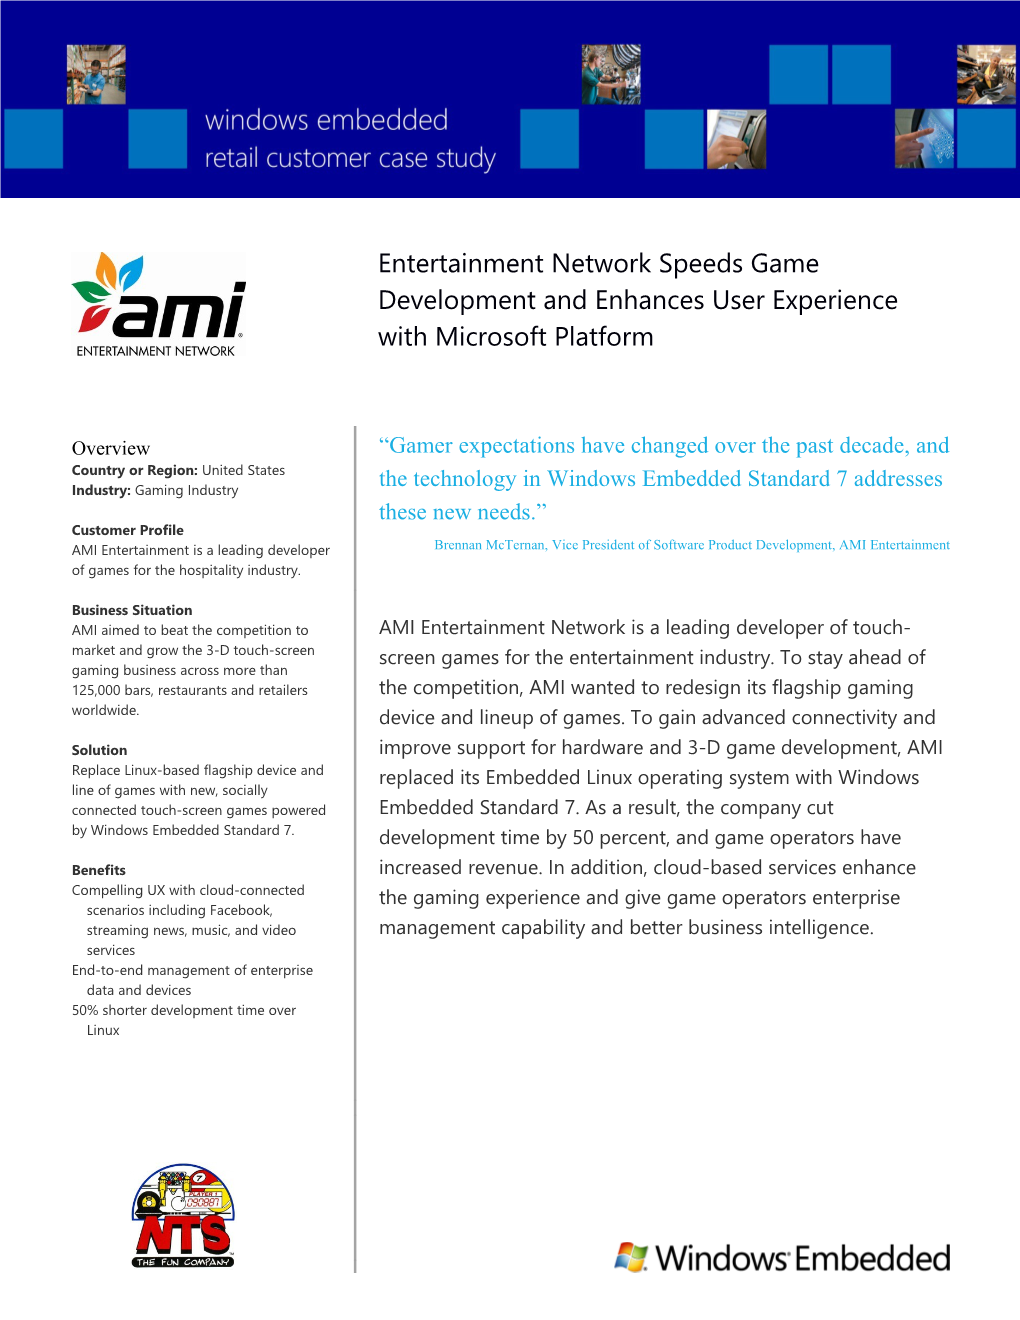 Entertainment Network Speeds Game Development and Enhances User Experience with Microsoft